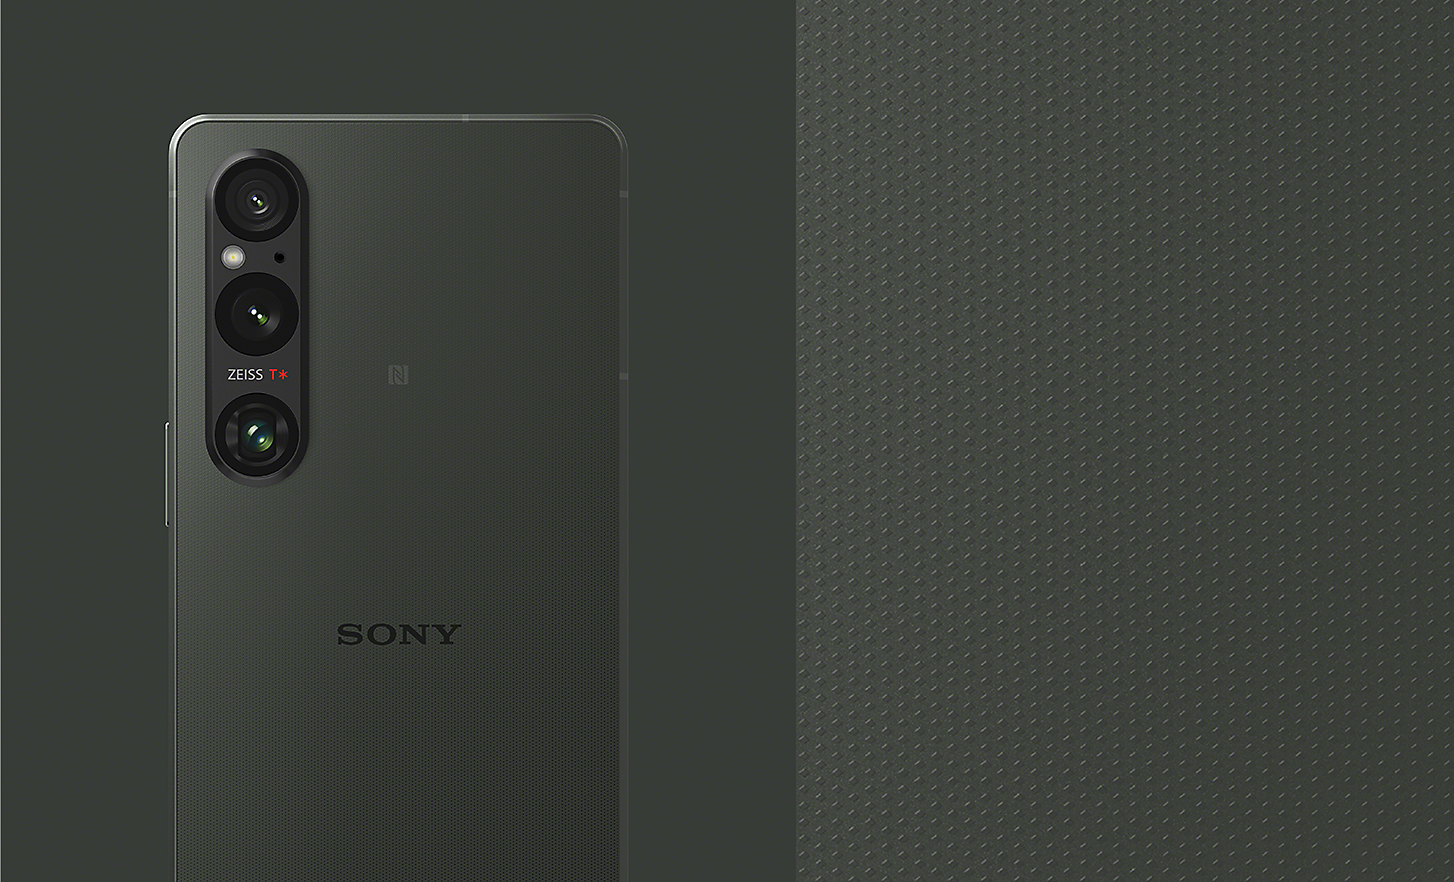 Rear-facing Xperia 1 V in Khaki Green alongside an extreme close-up showing its textured finish